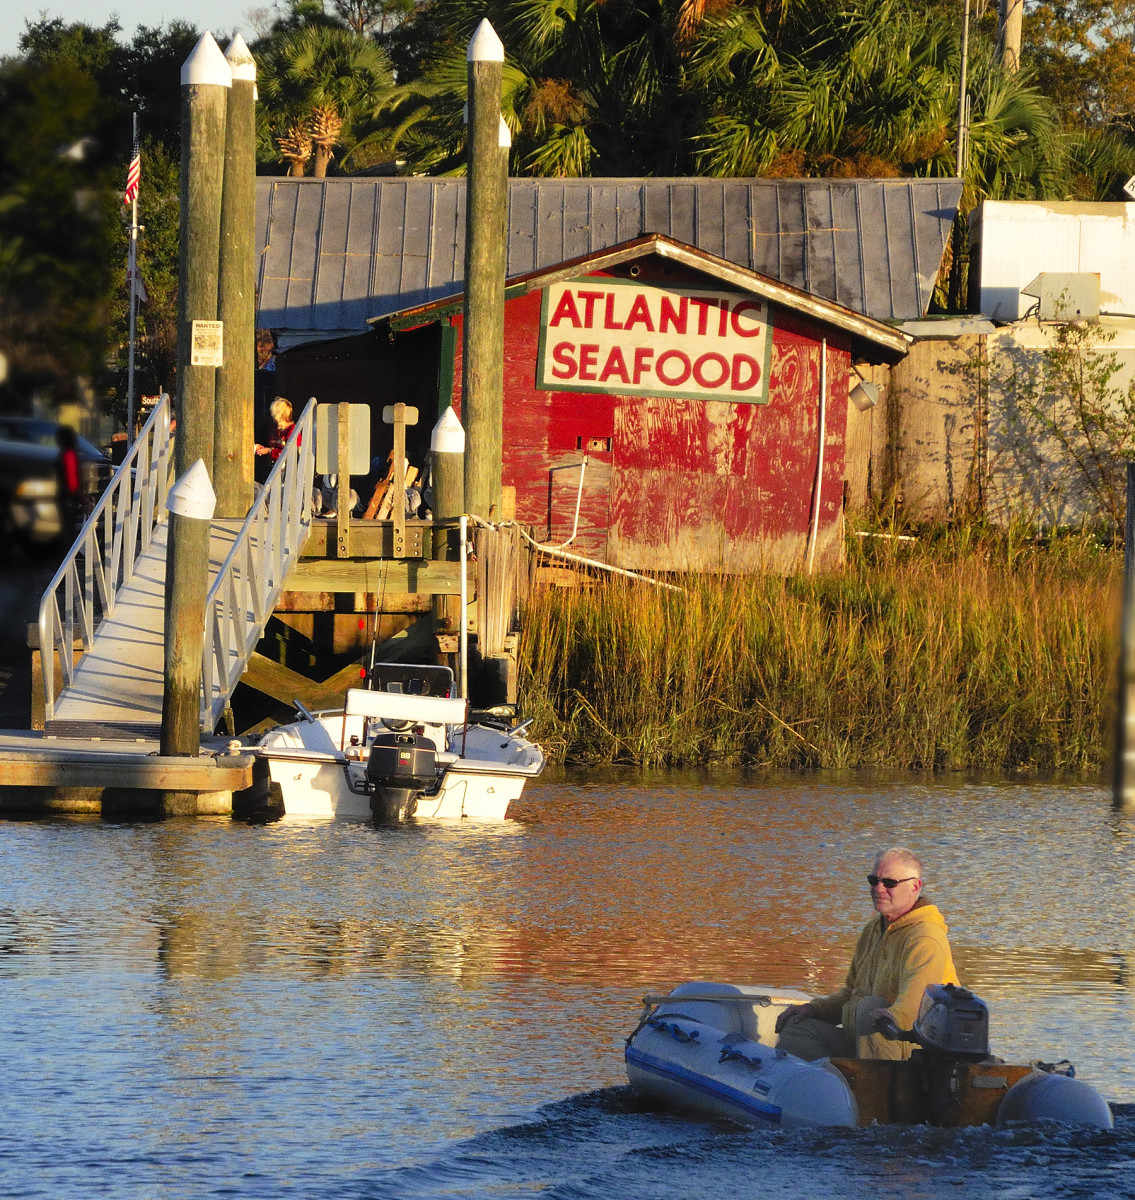 Atlantic Seafood Bait & Tackle is a gathering spot for local characters.